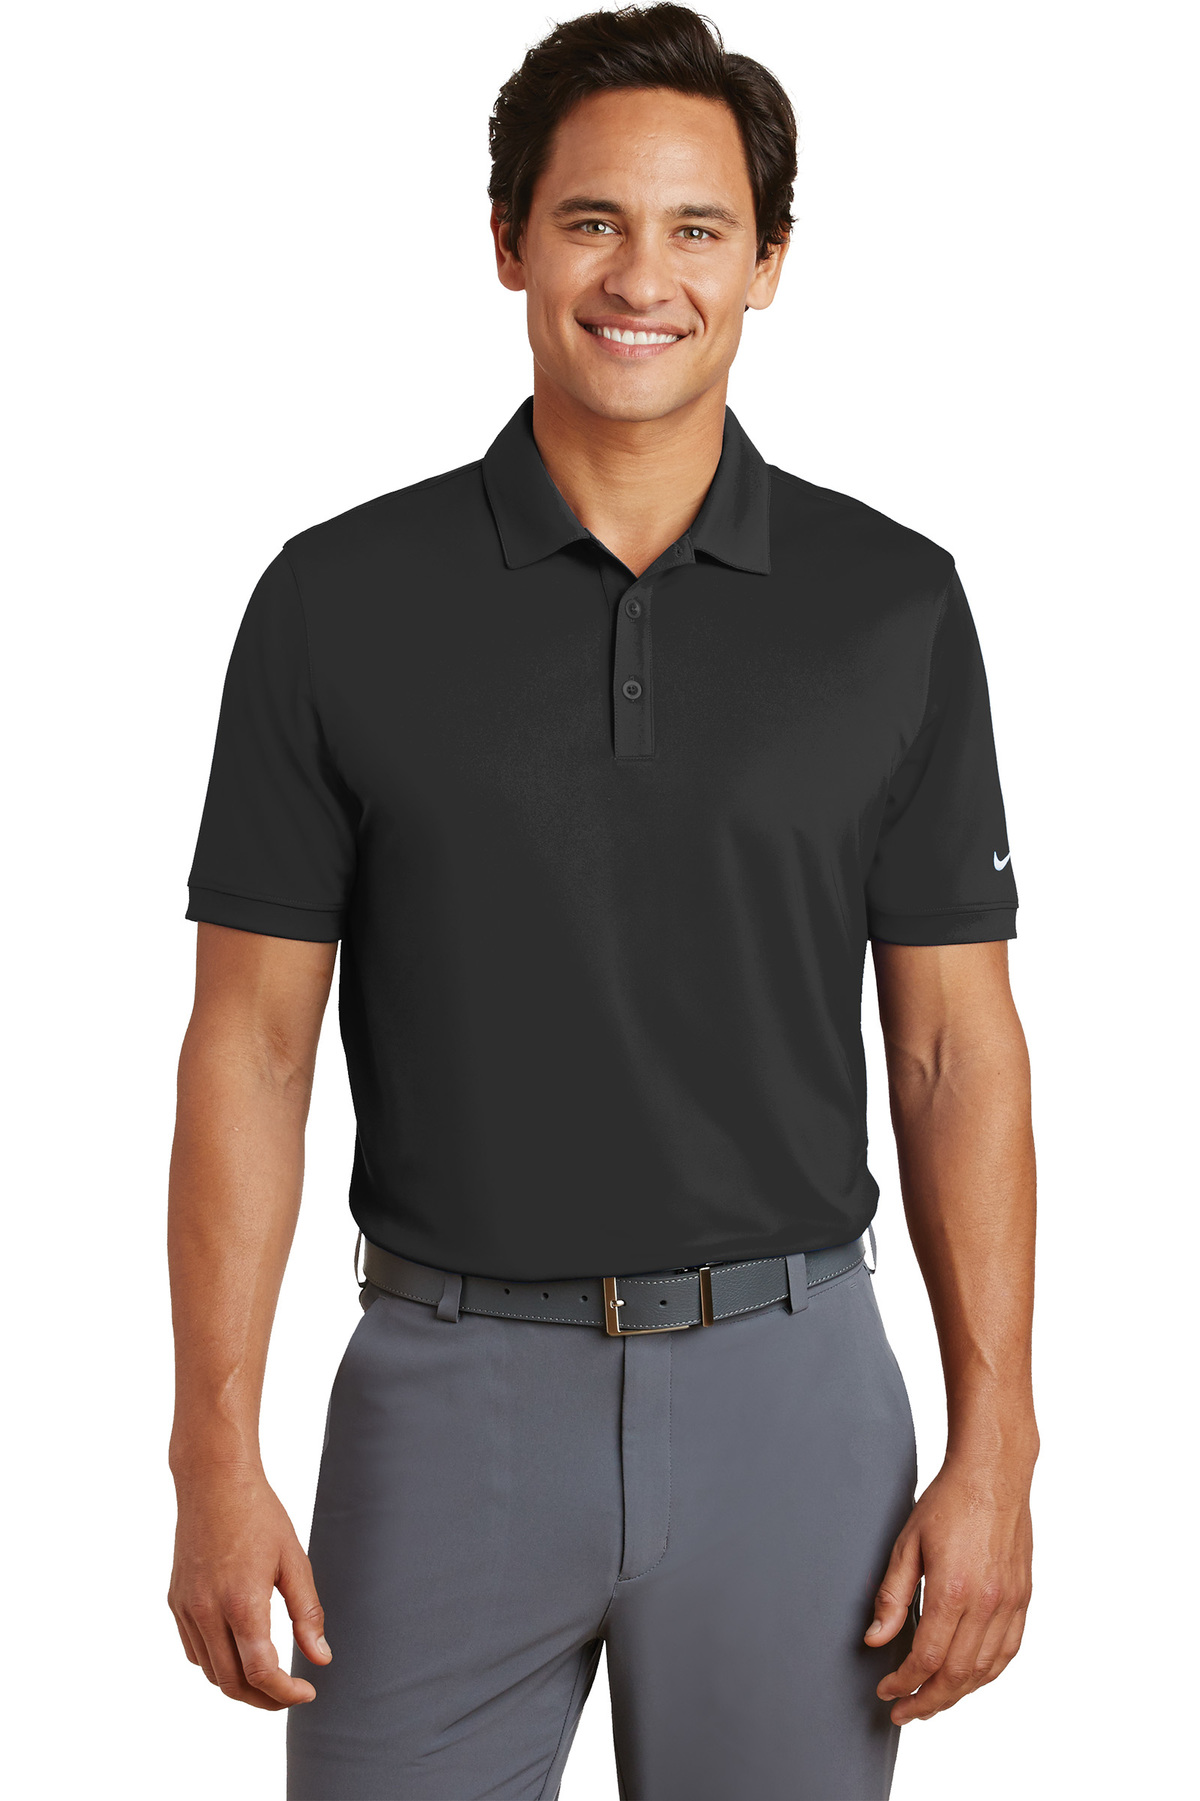 Nike Golf Embroidered Men's Dri-FIT Players Modern Fit Polo - Queensboro